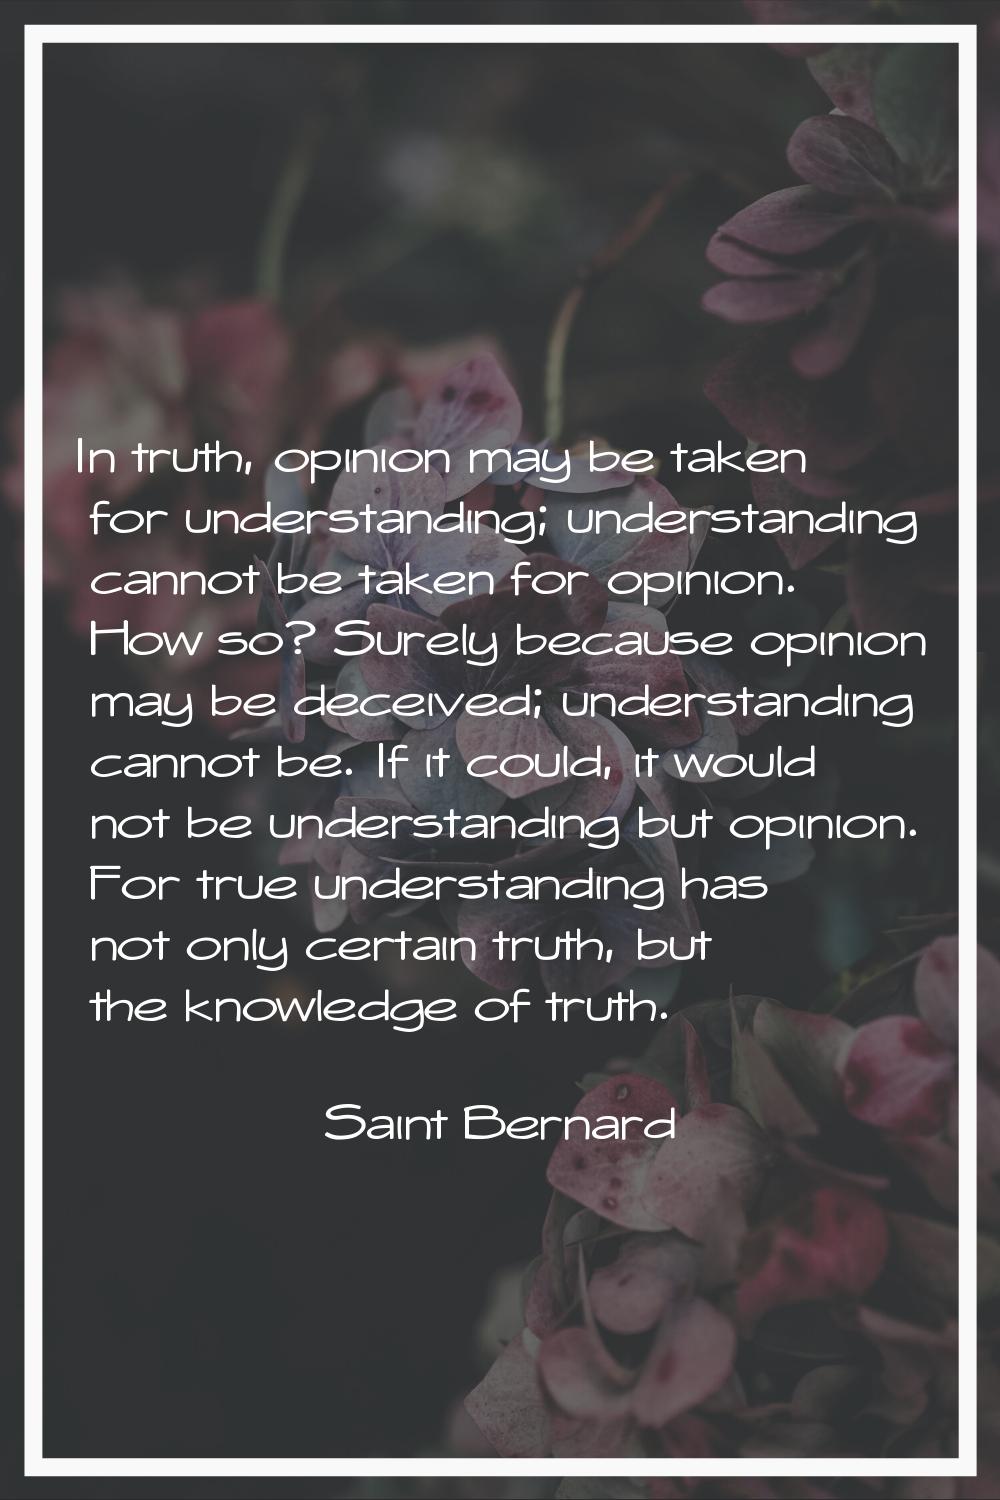 In truth, opinion may be taken for understanding; understanding cannot be taken for opinion. How so